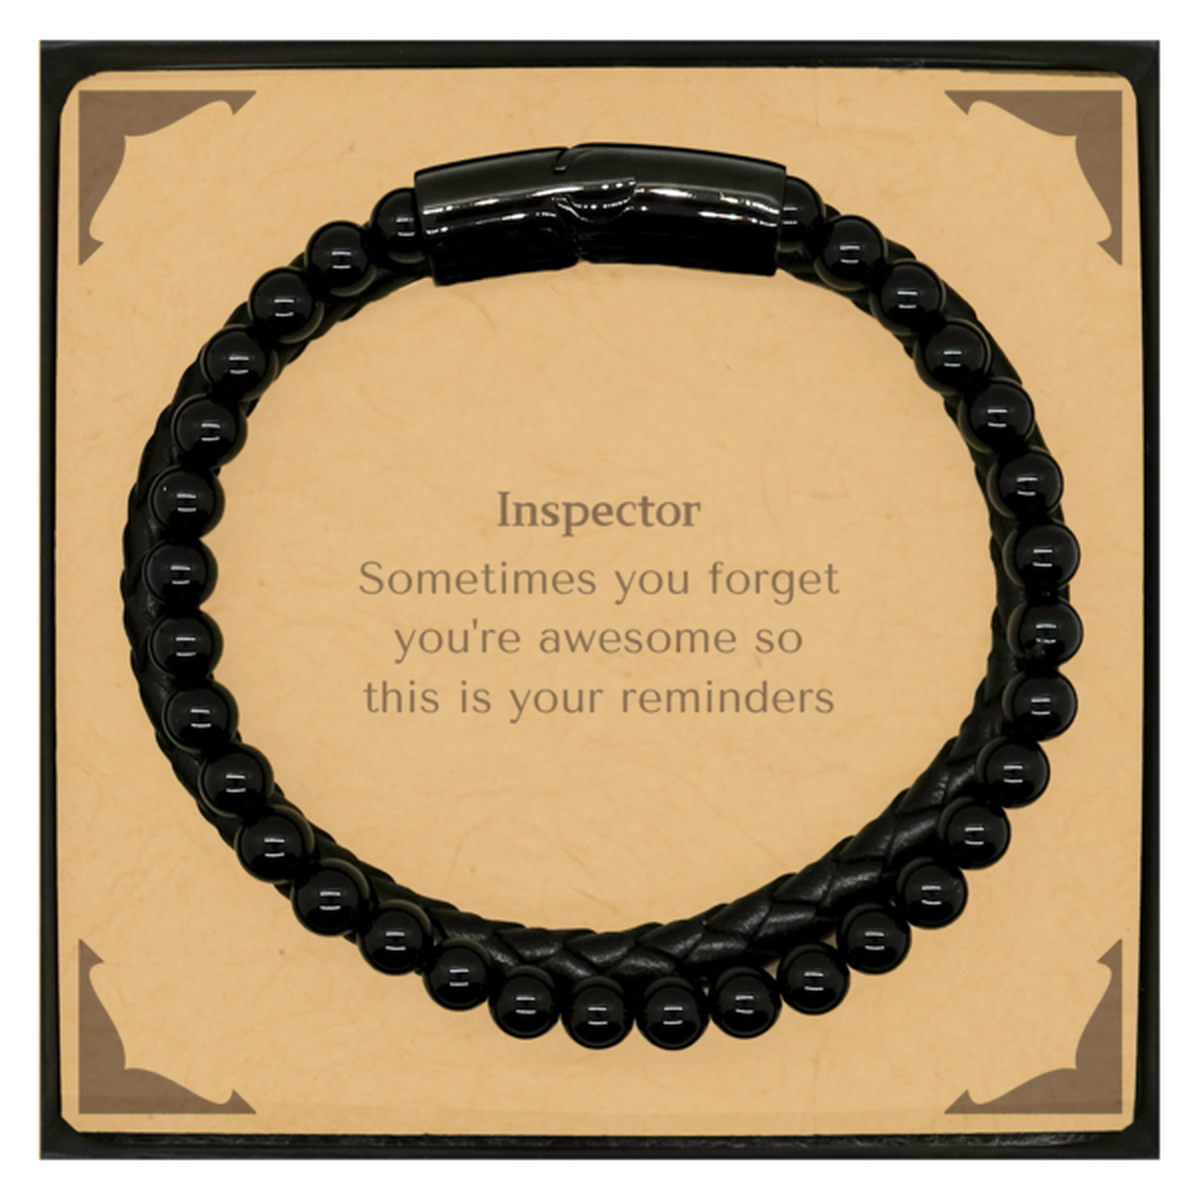 Sentimental Inspector Stone Leather Bracelets, Inspector Sometimes you forget you're awesome so this is your reminders, Graduation Christmas Birthday Gifts for Inspector, Men, Women, Coworkers